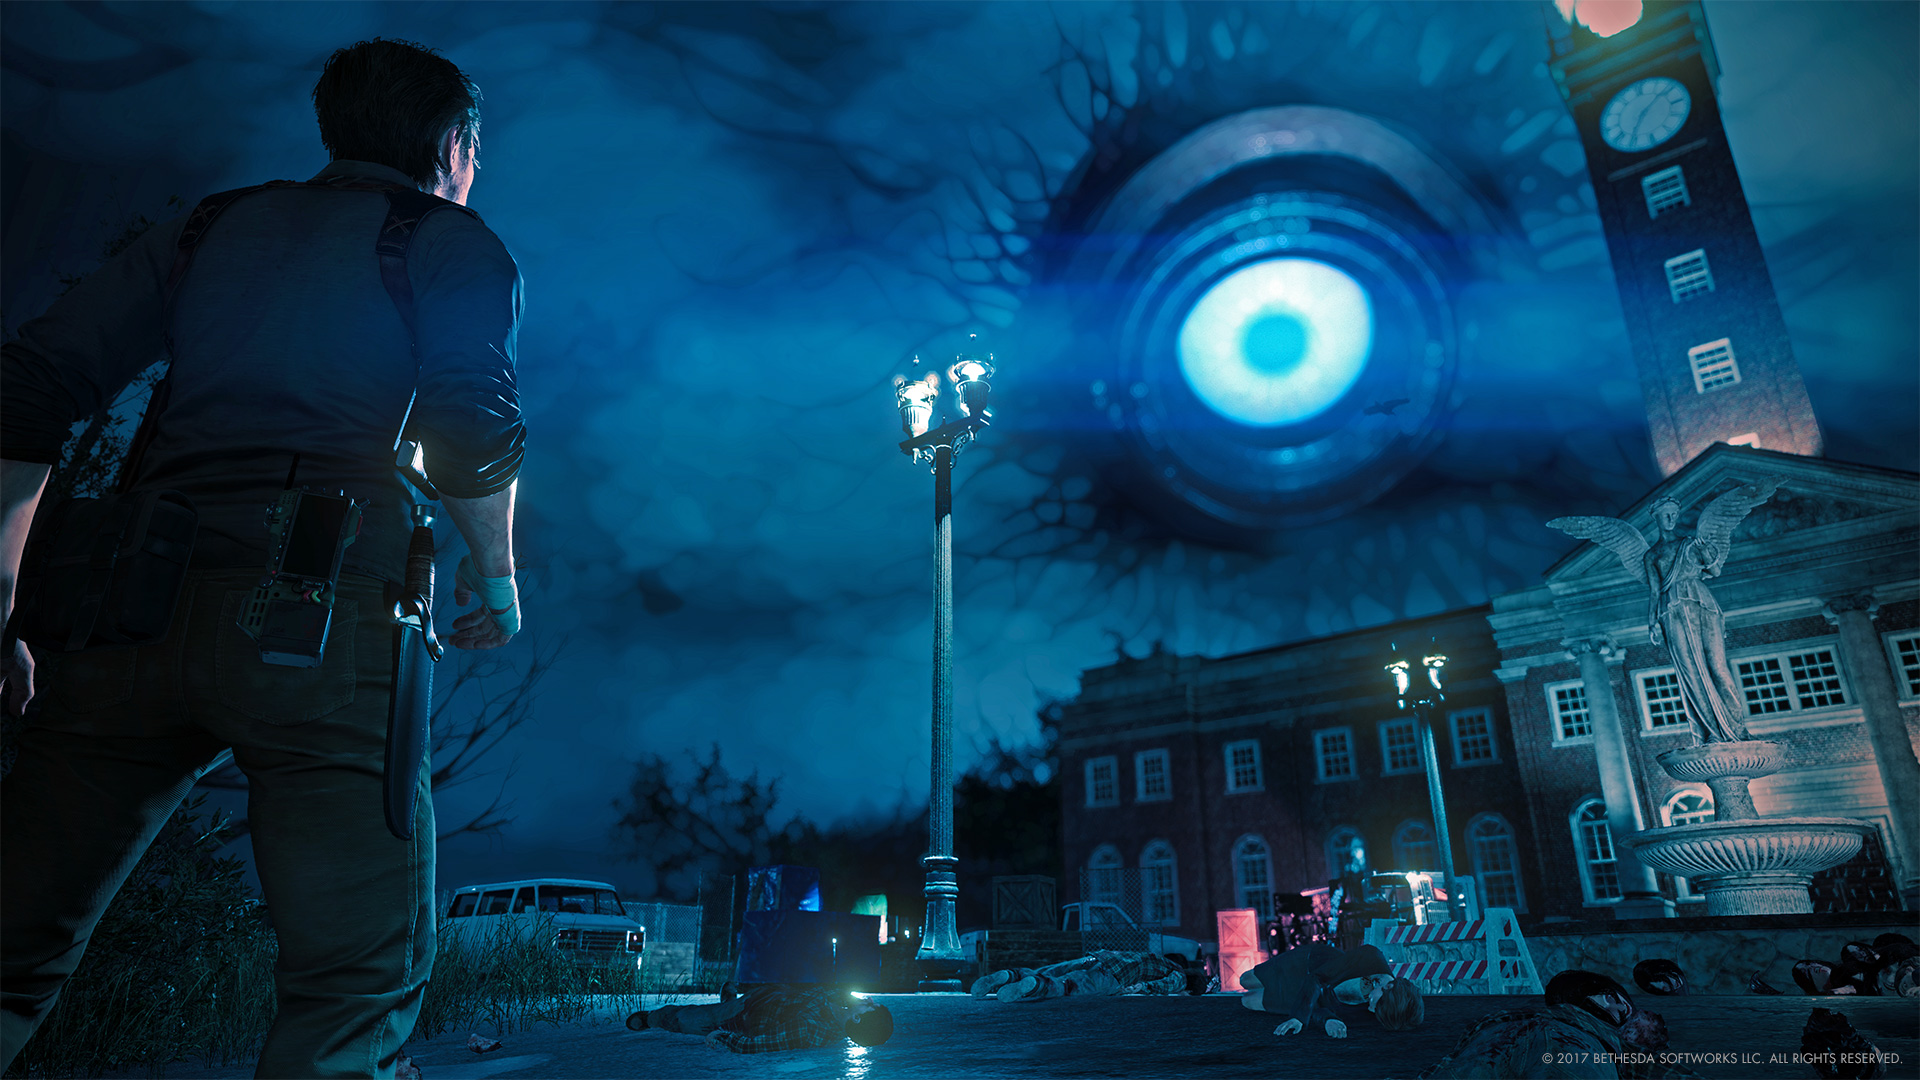 Media asset in full size related to 3dfxzone.it news item entitled as follows: Bethesda aggiunge la modlit di gioco in prima persona al game The Evil Within 2 | Image Name: news27879_The-Evil-Within-2-Screenshot_5.jpg